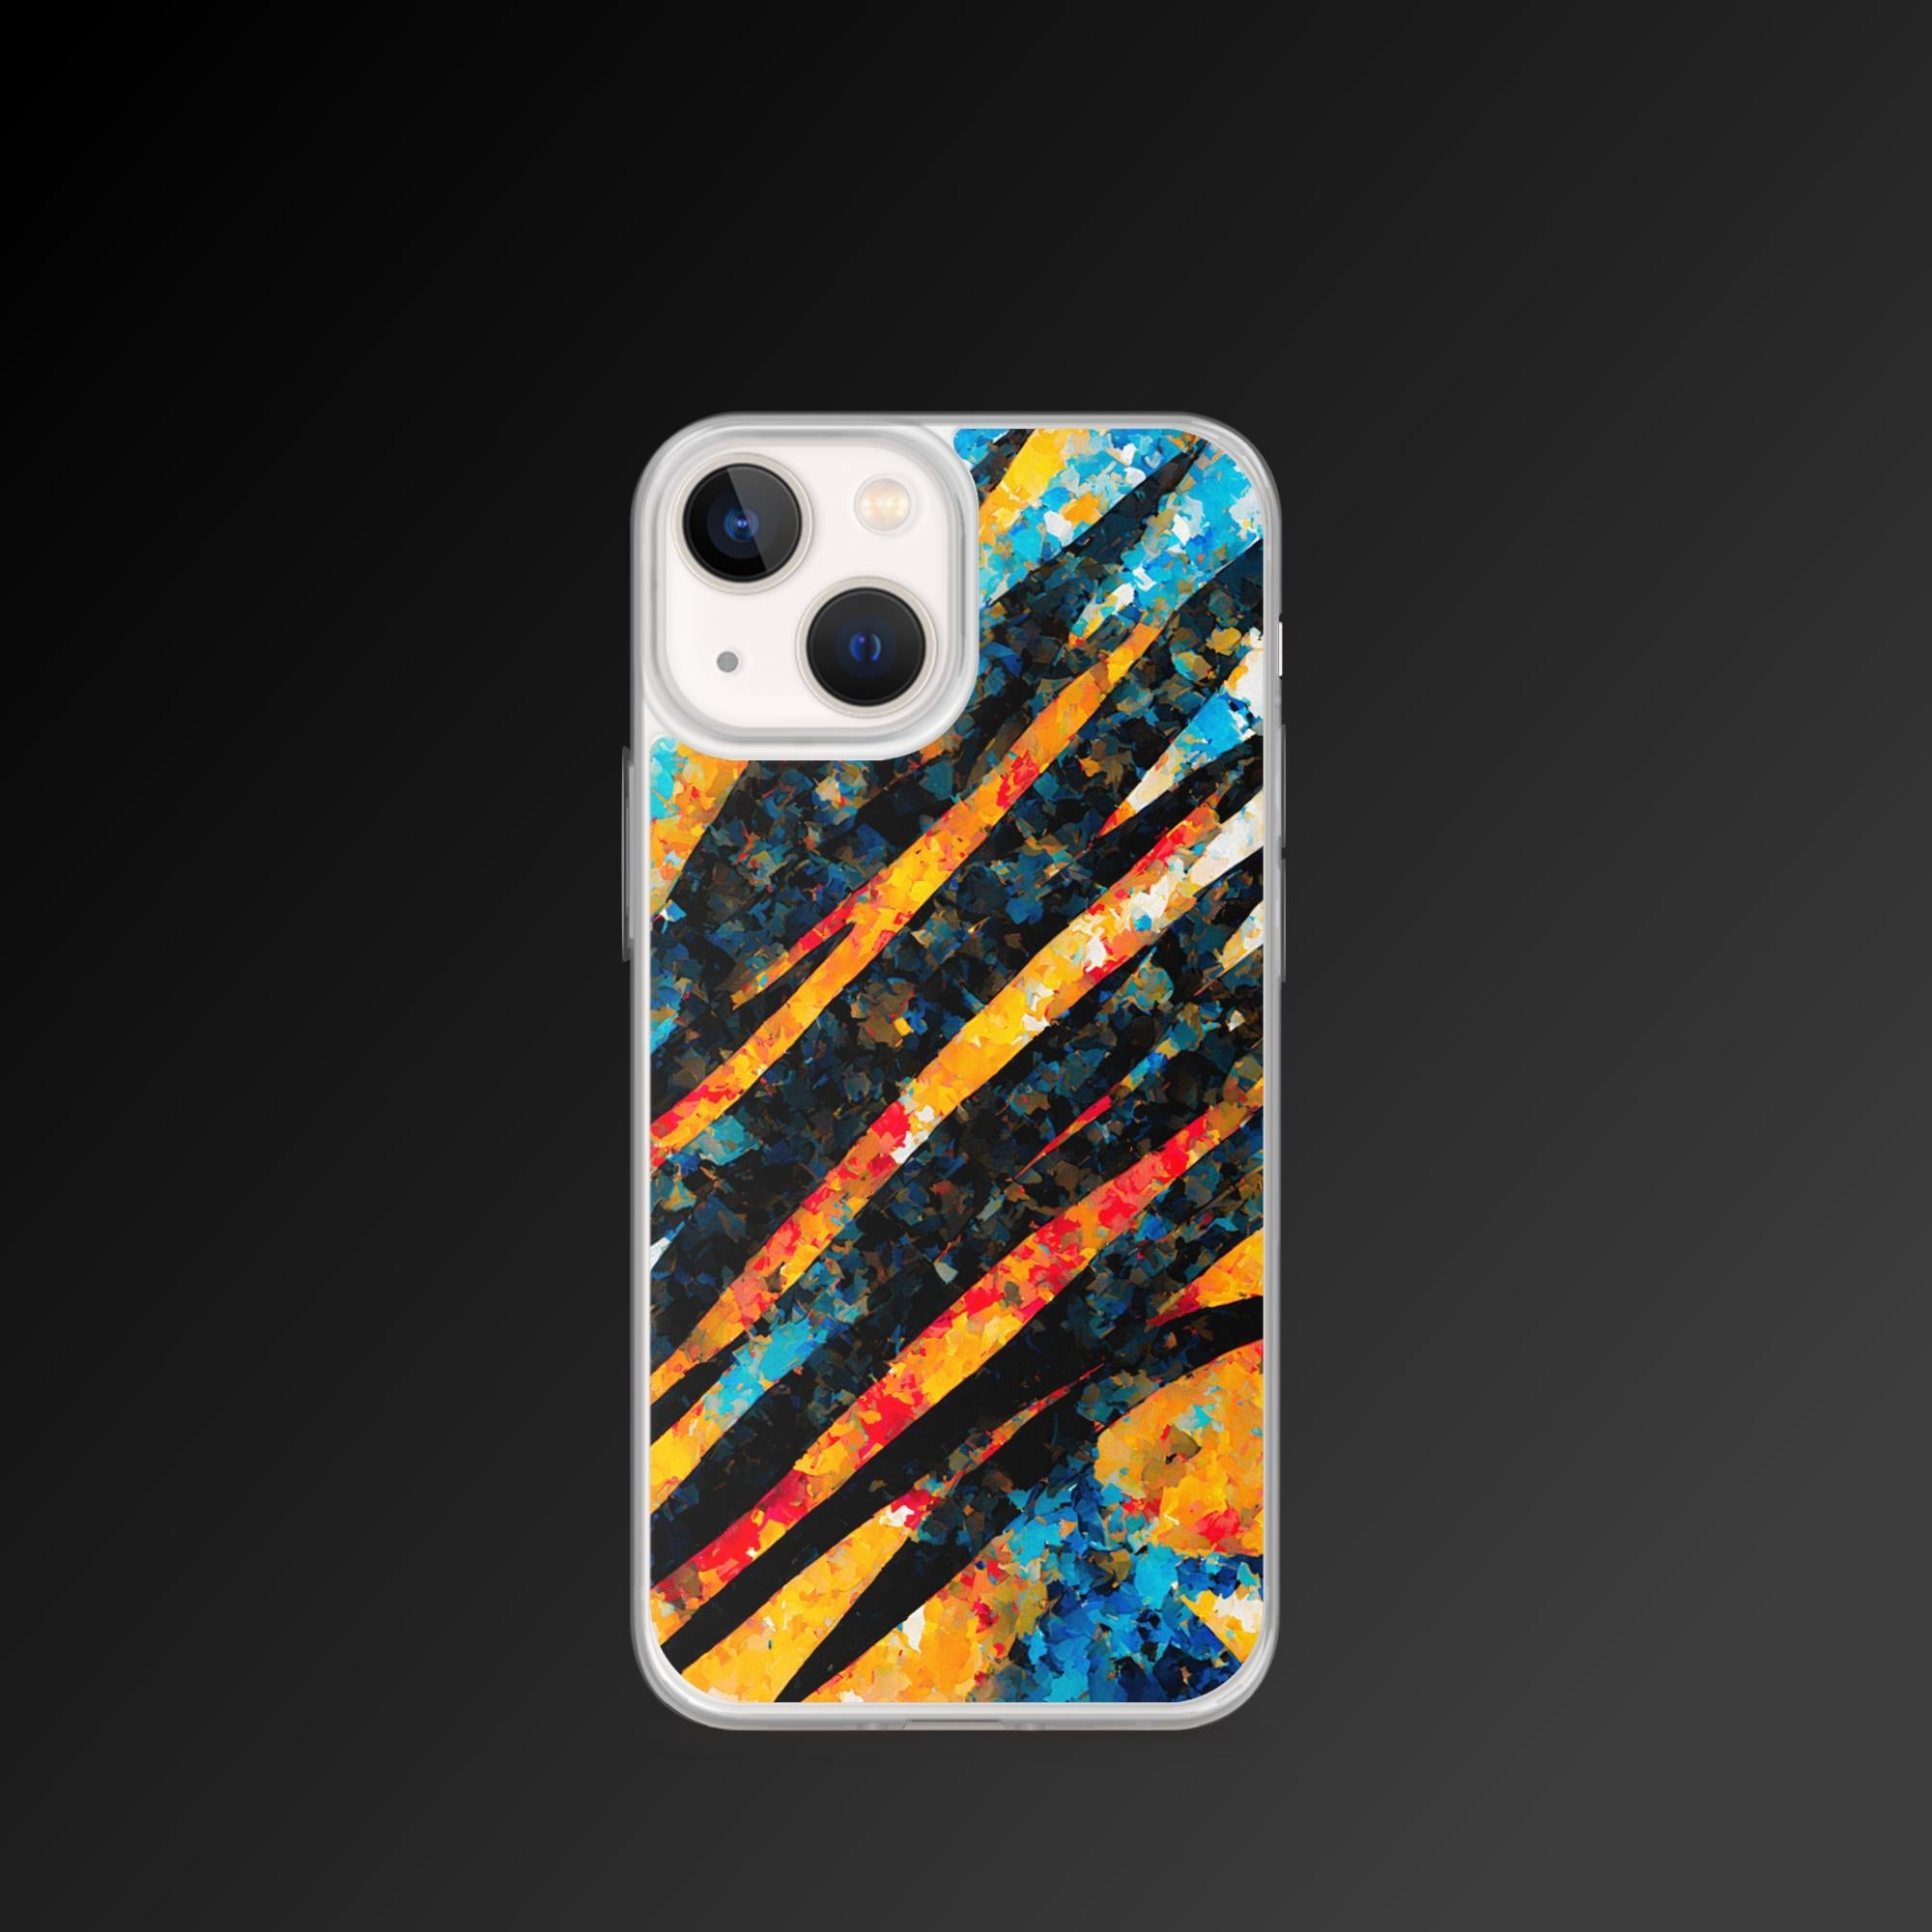 "Constant scar" clear iphone case - Clear iphone case - Ever colorful